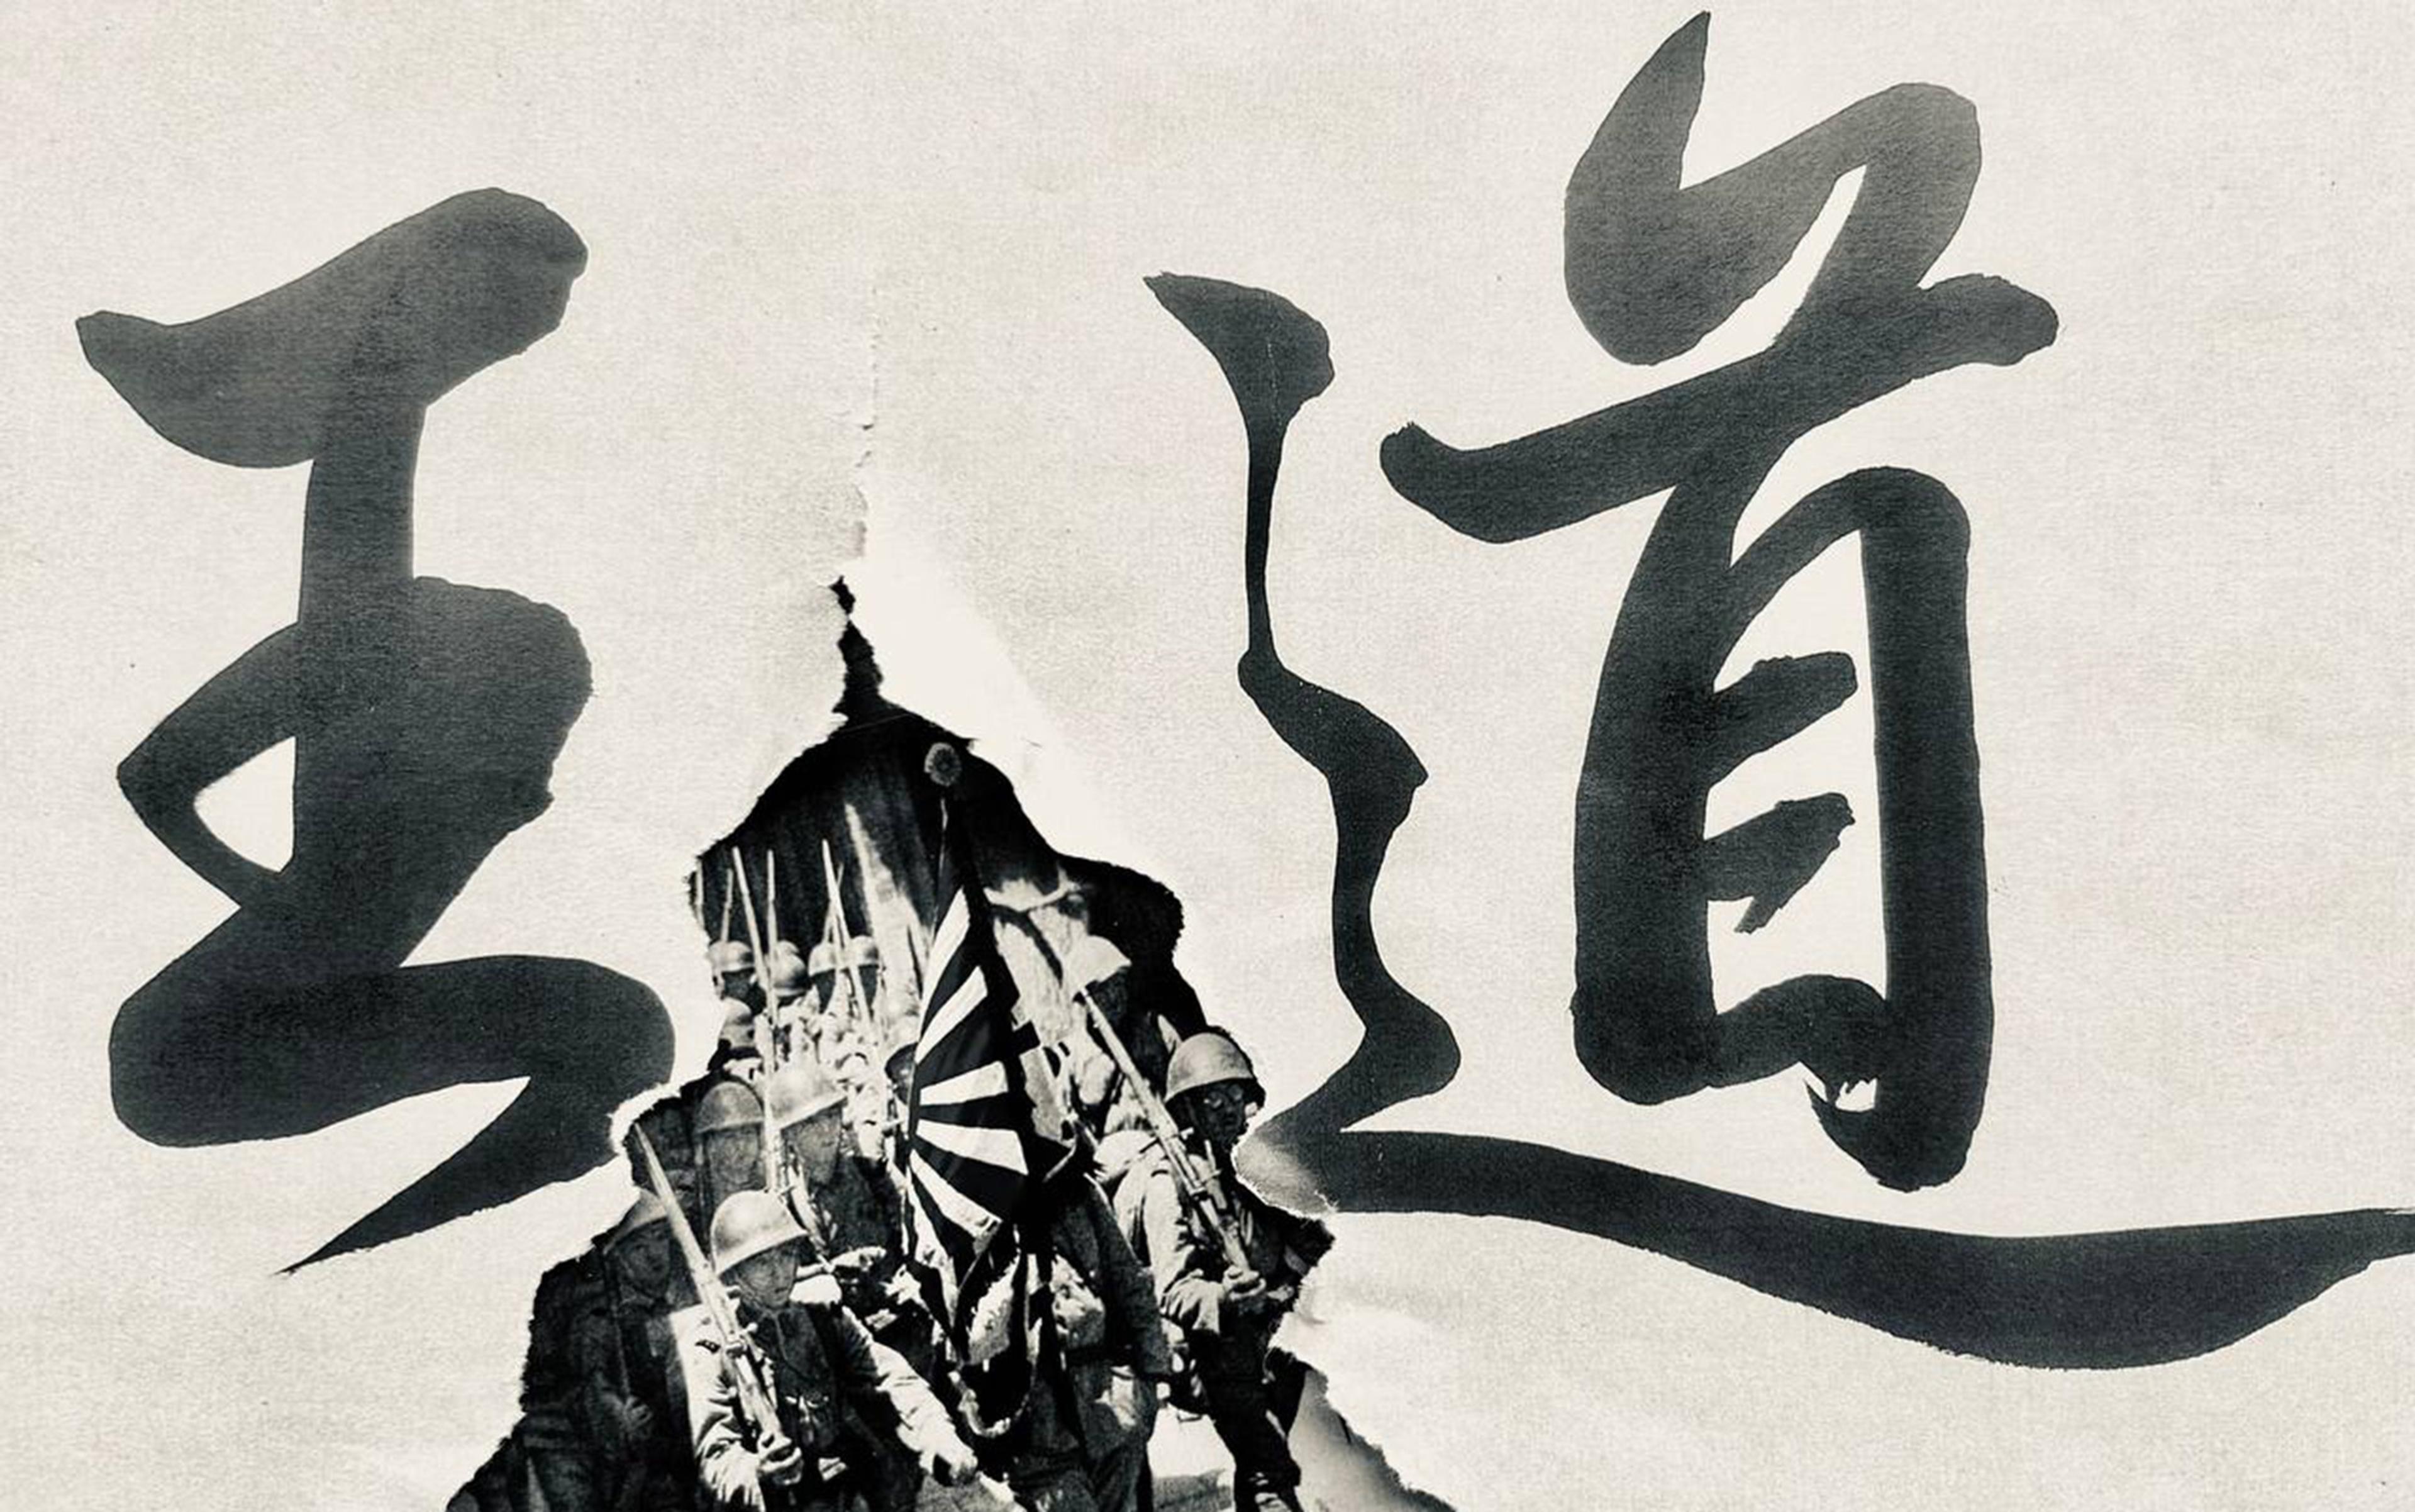 Black and white image of Japanese soldiers in battle gear marching with a Rising Sun Flag, superimposed with large Japanese calligraphy characters on a plain background.